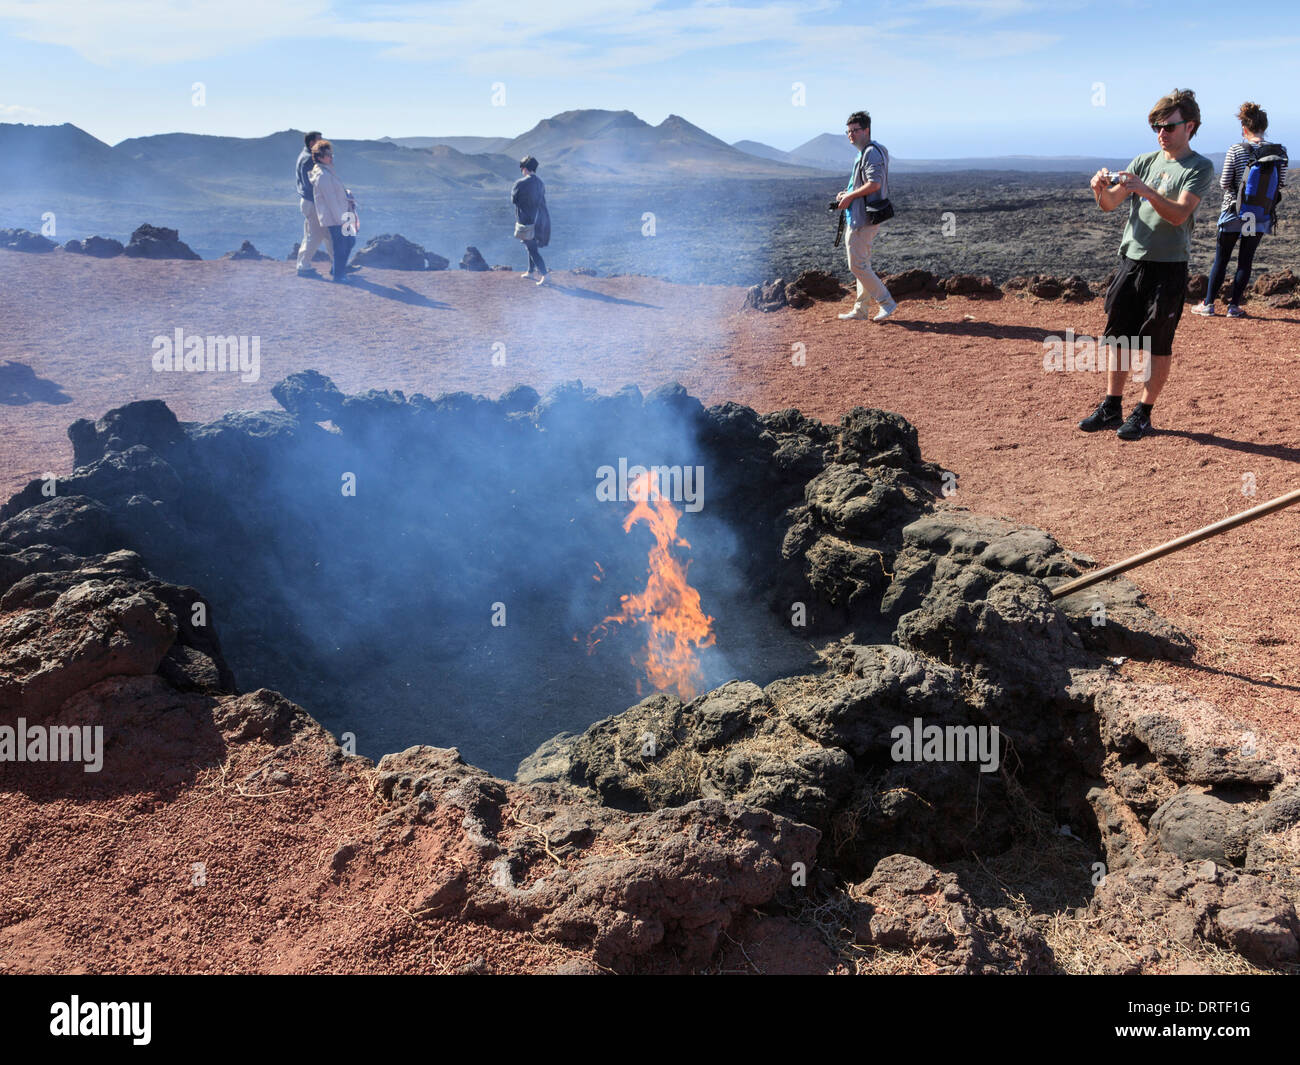 Tourists watch a demonstration of brushwood igniting with heat from volcanic vent on Fire Mountain in Timanfaya National Park, Lanzarote, Spain Stock Photo